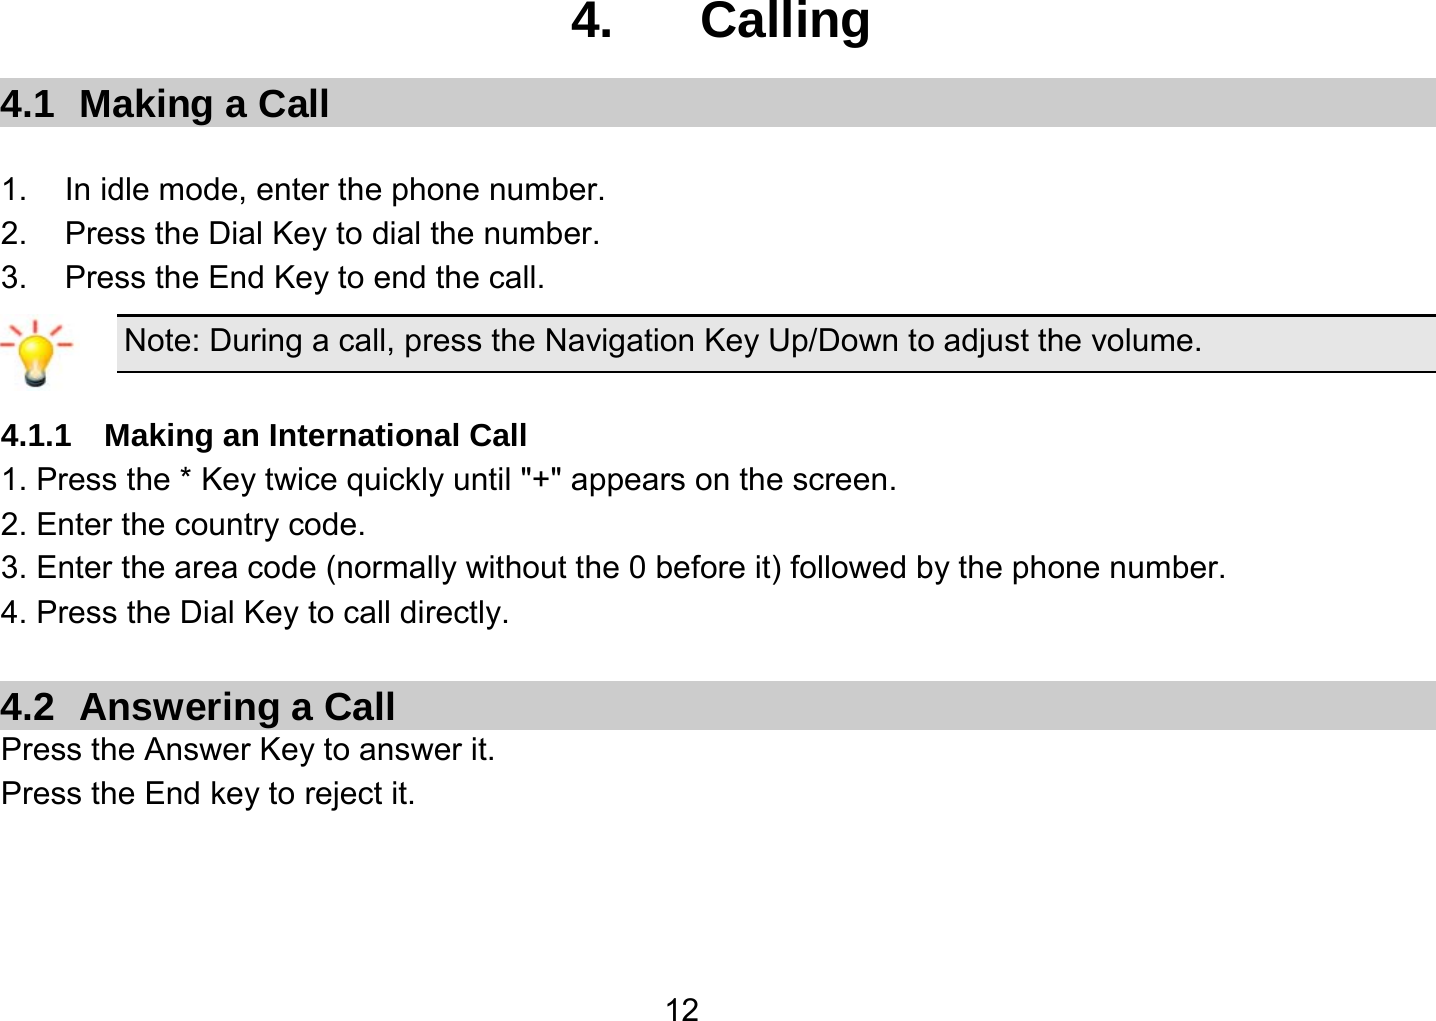   124.  Calling 4.1  Making a Call  1.  In idle mode, enter the phone number. 2. Press the Dial Key to dial the number. 3.  Press the End Key to end the call. Note: During a call, press the Navigation Key Up/Down to adjust the volume.  4.1.1  Making an International Call 1. Press the * Key twice quickly until &quot;+&quot; appears on the screen. 2. Enter the country code. 3. Enter the area code (normally without the 0 before it) followed by the phone number. 4. Press the Dial Key to call directly.  4.2  Answering a Call Press the Answer Key to answer it. Press the End key to reject it.  